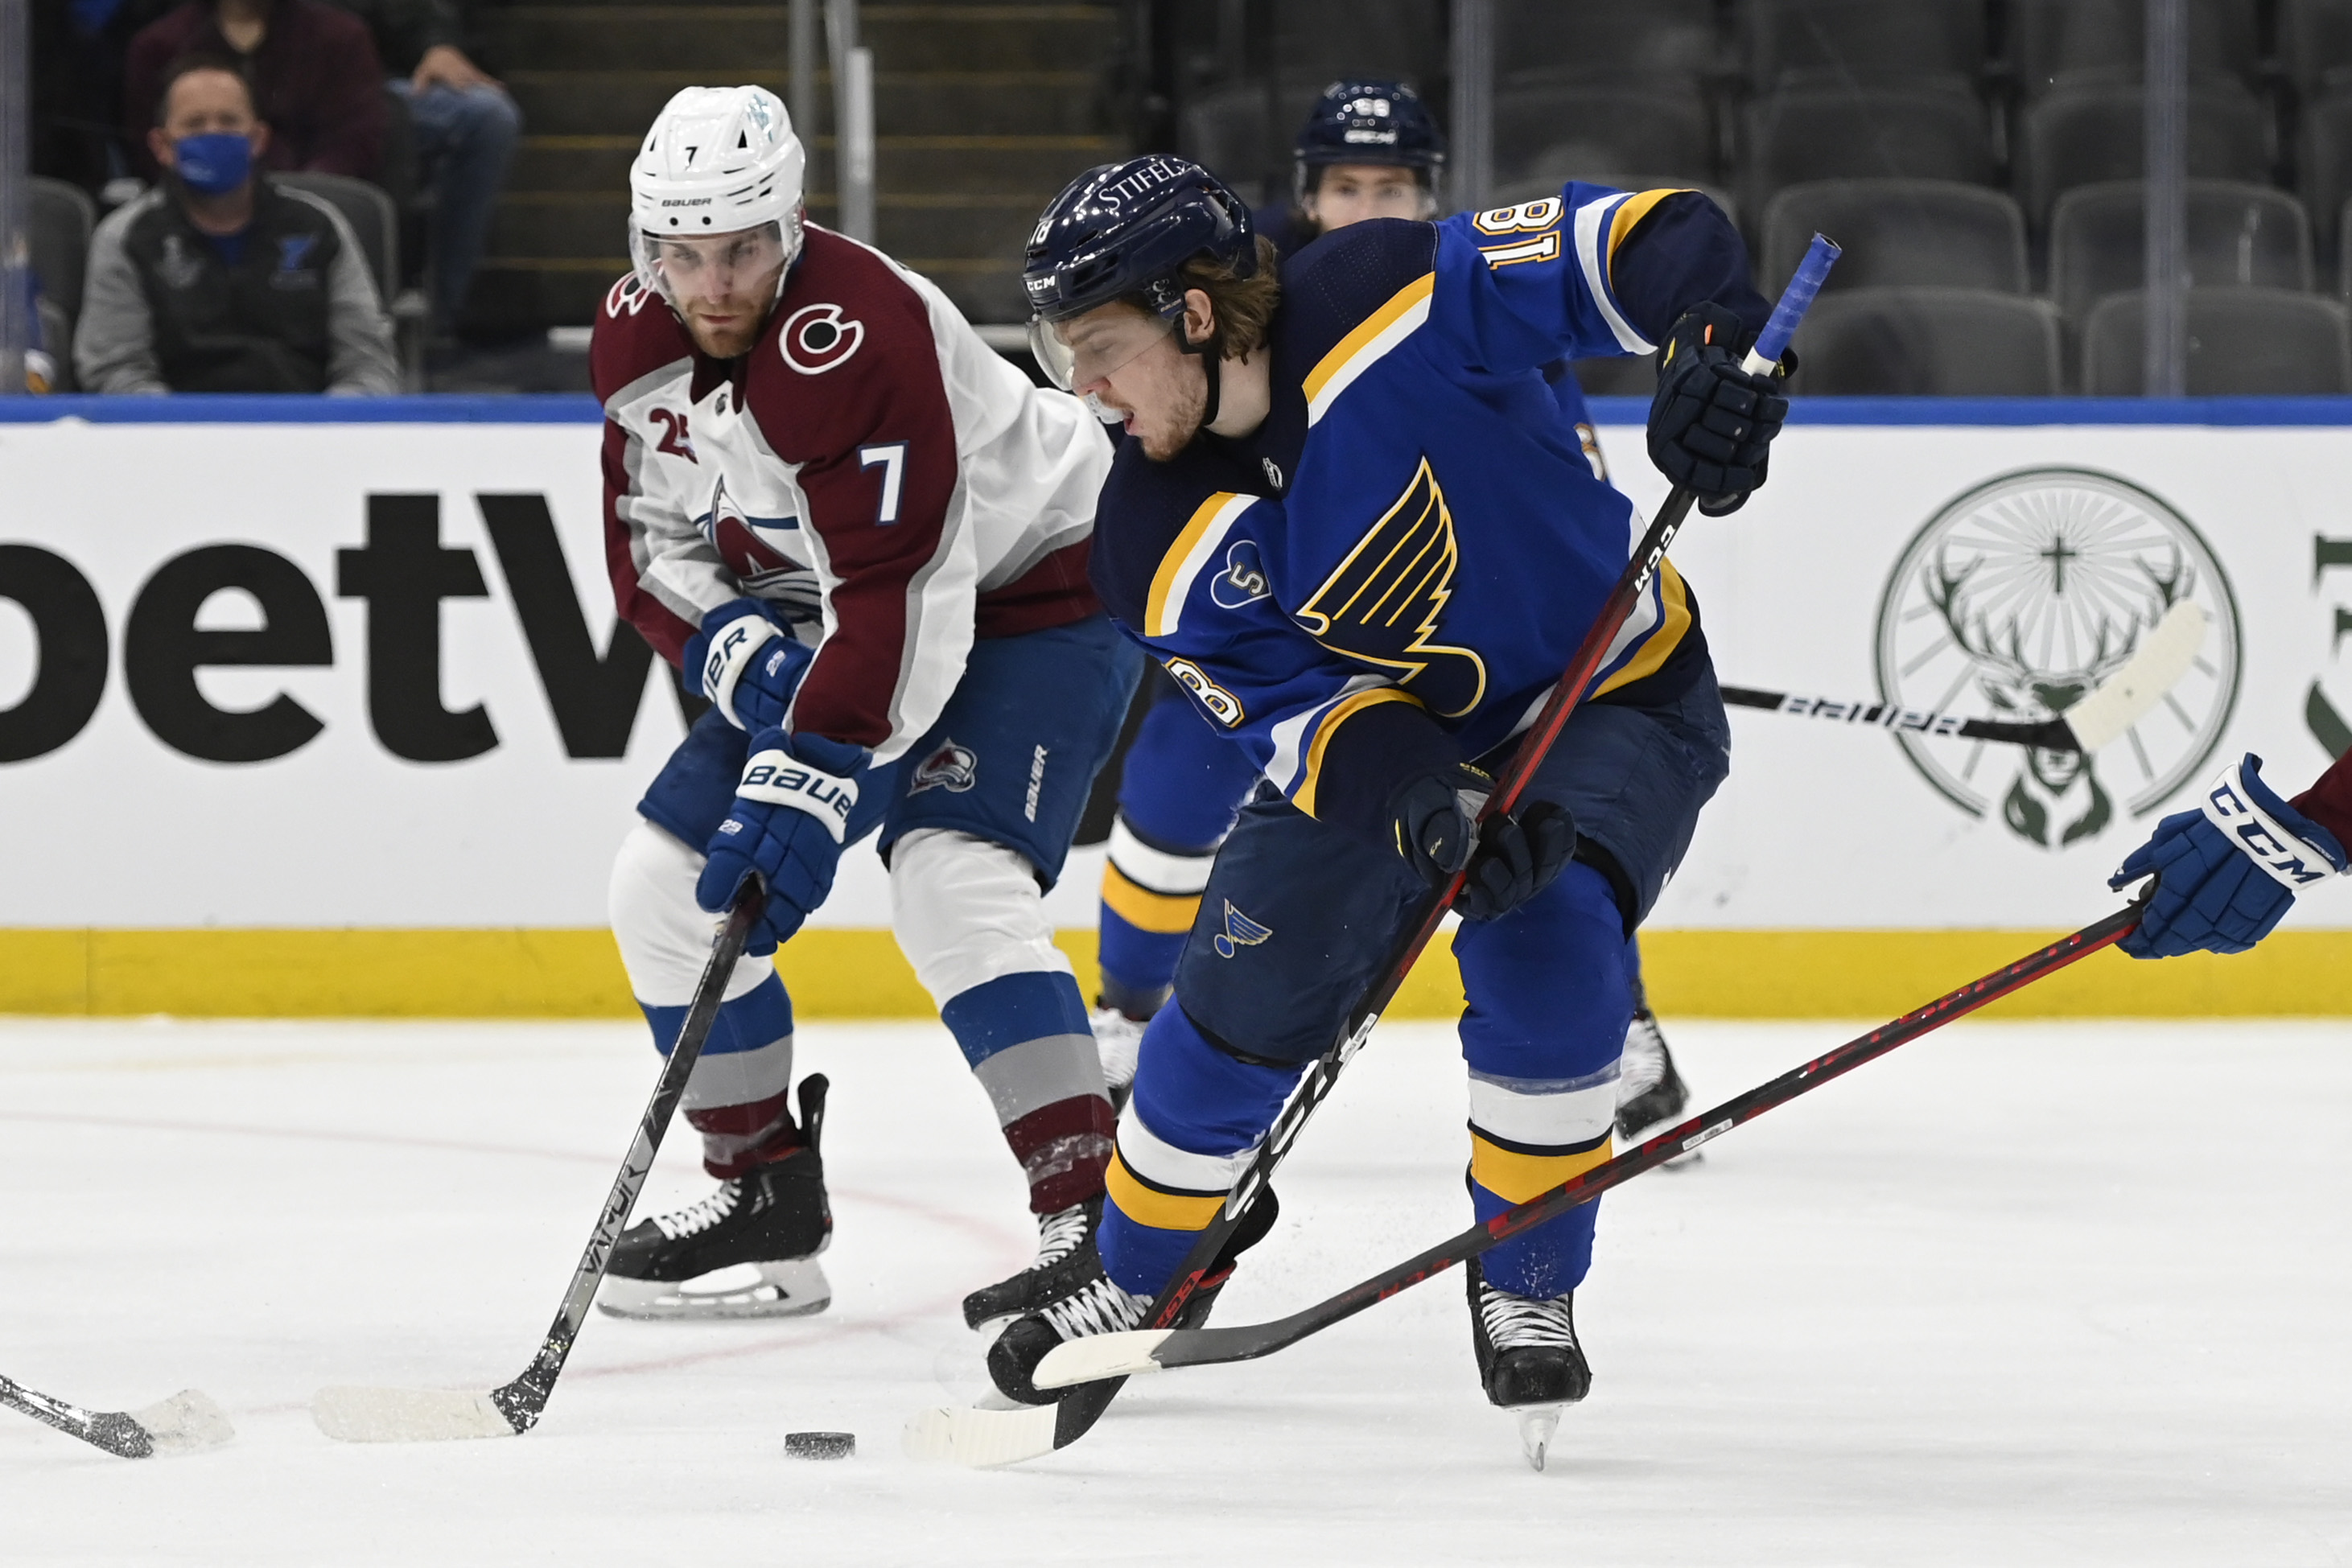 NHL: Colorado Avalanche at St. Louis Blues